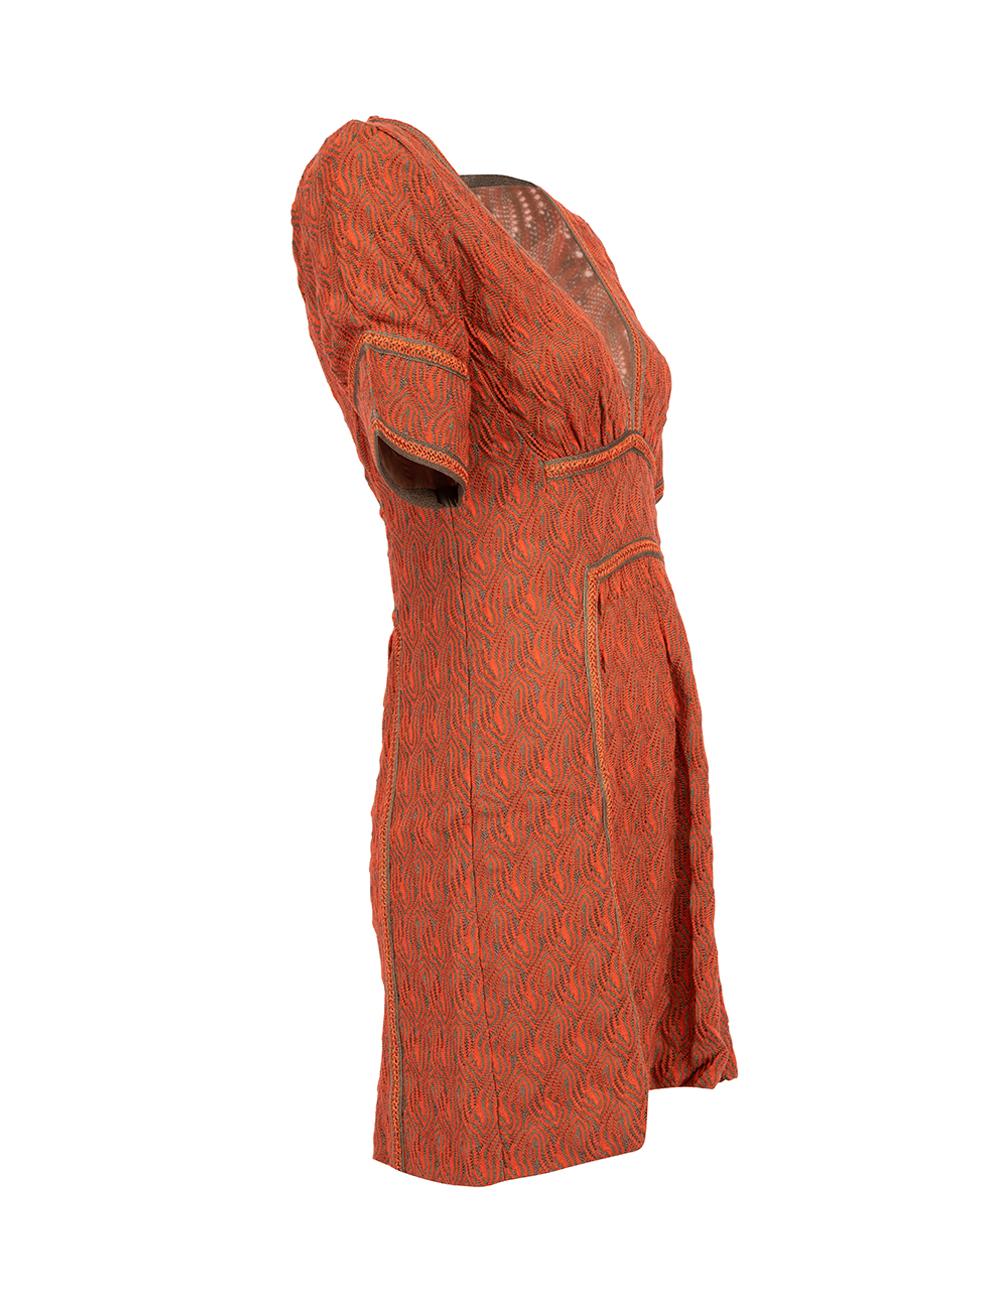 CONDITION is Never Worn. No visible wear to dress is evident on this used Missoni designer resale item. Details Orange Viscose and wool blend Mini dress Abstract pattern Short sleeves V neckline Side zip closure Made in Italy Composition 50%